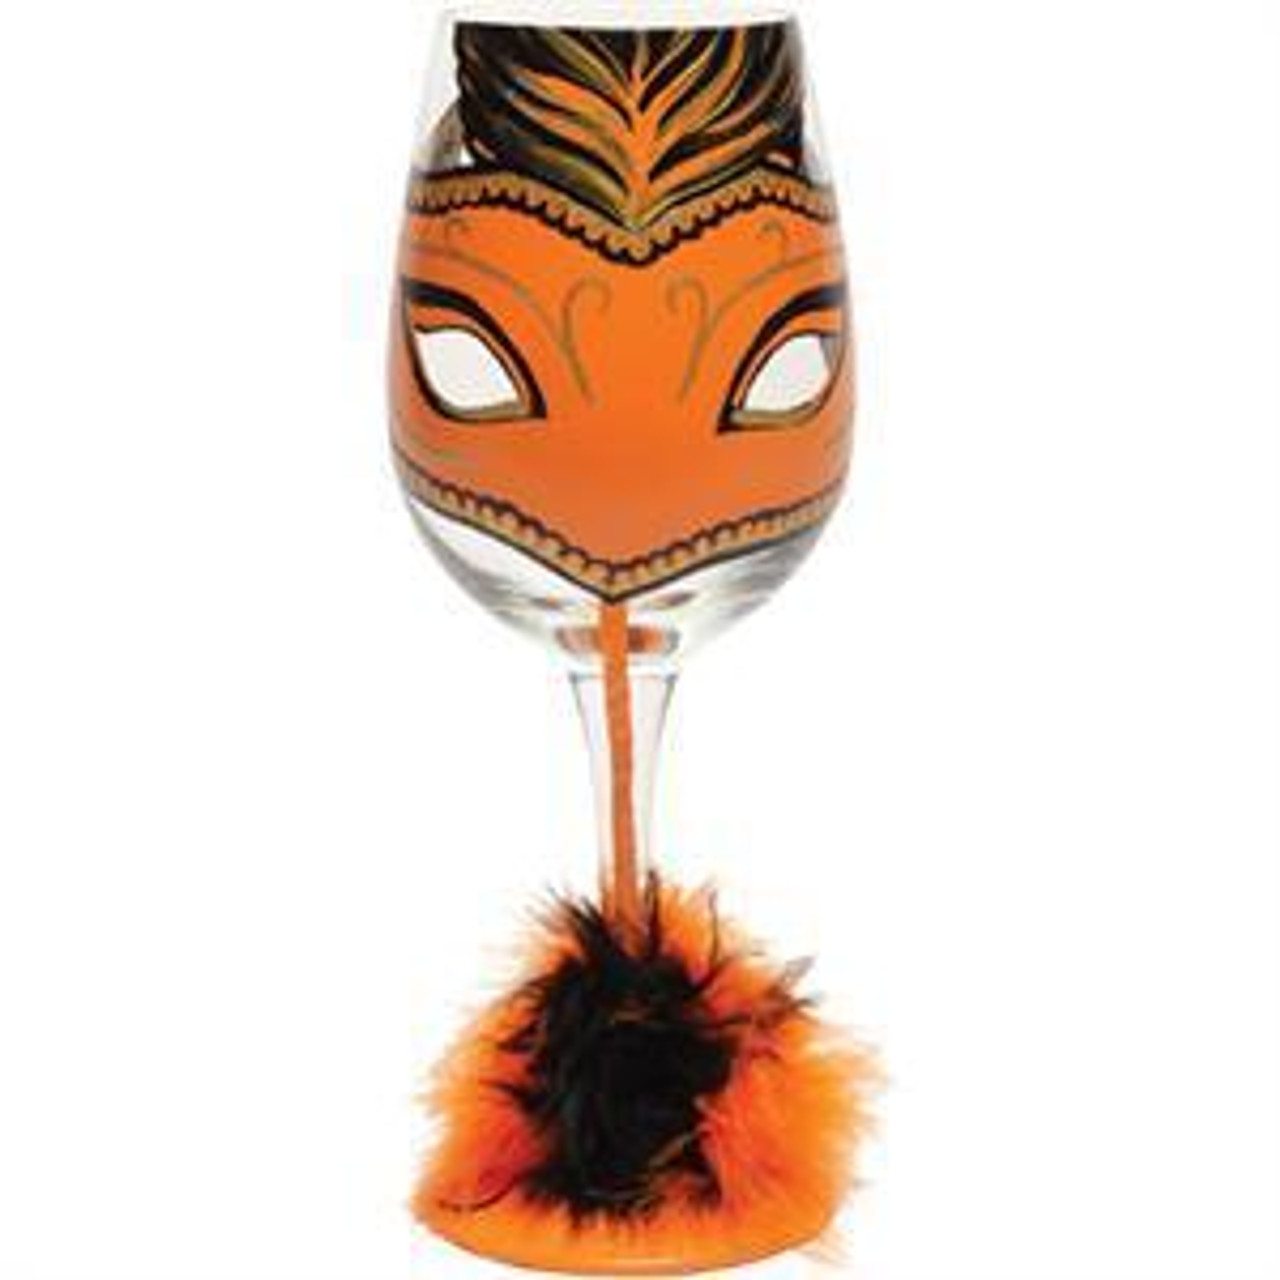  Hauntingly Fun Wine Accessories For Your Halloween Extravaganza!